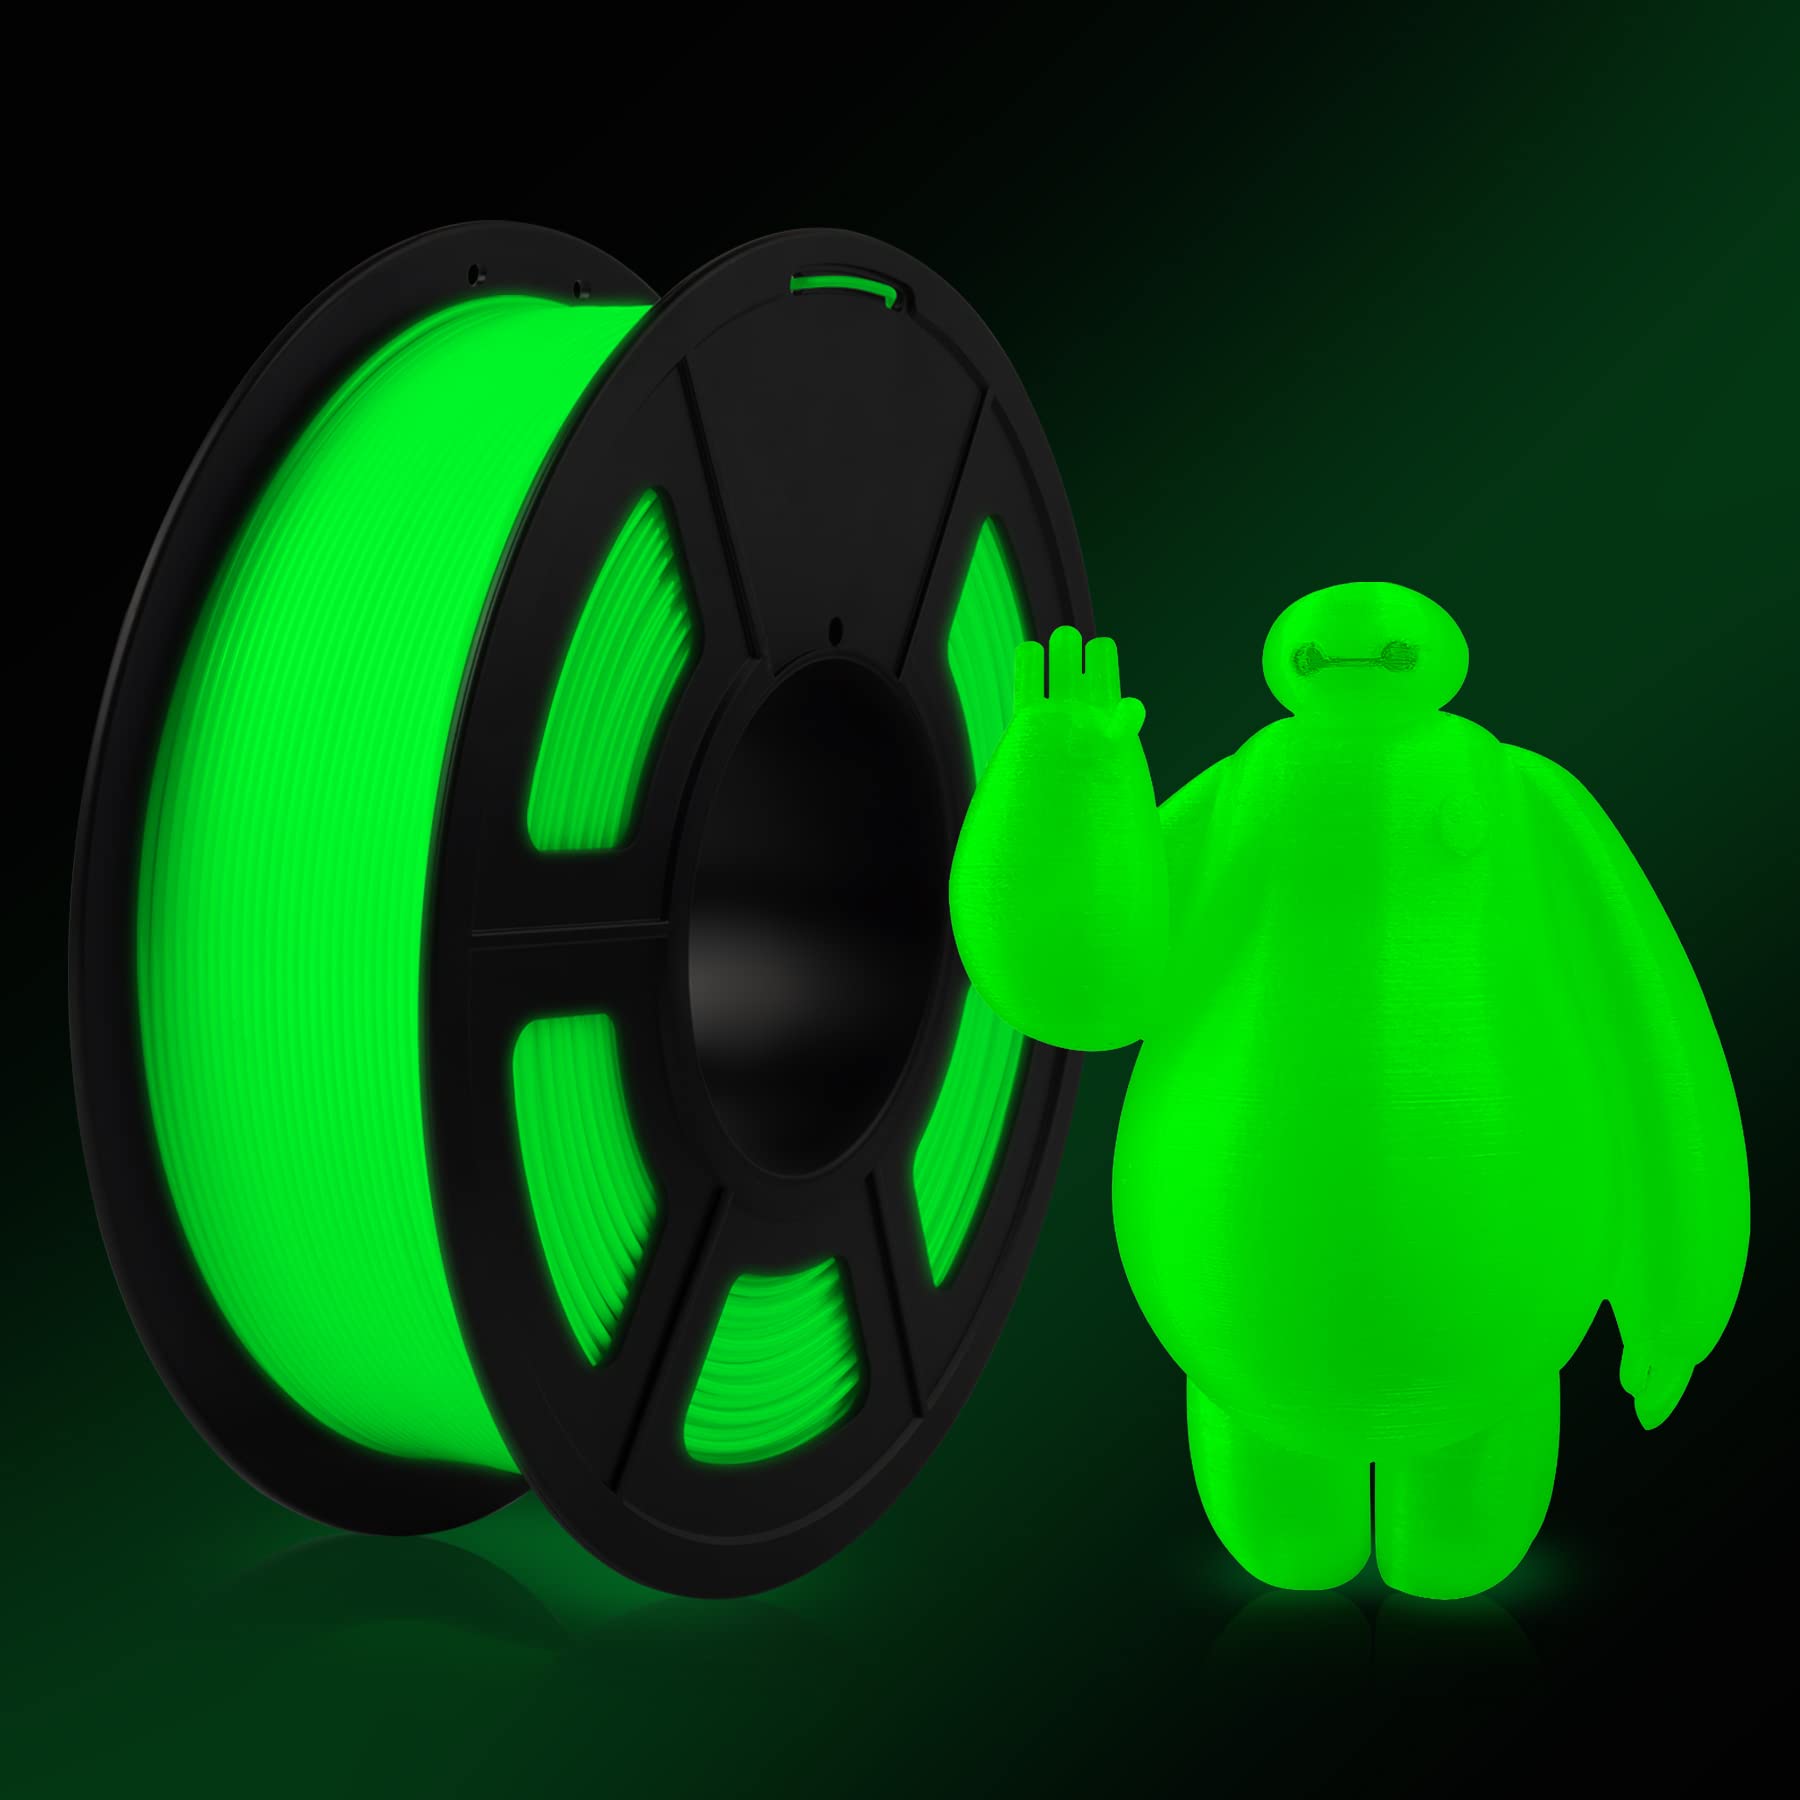 SUNLU Glow in The Dark PLA Filament 1.75 mm 3D Printer Filament, 1kg Spool 3D Printing Filament, Dimensional Accuracy +/- 0.02 mm for 3D Printer and 3D Pen, Luminous Green